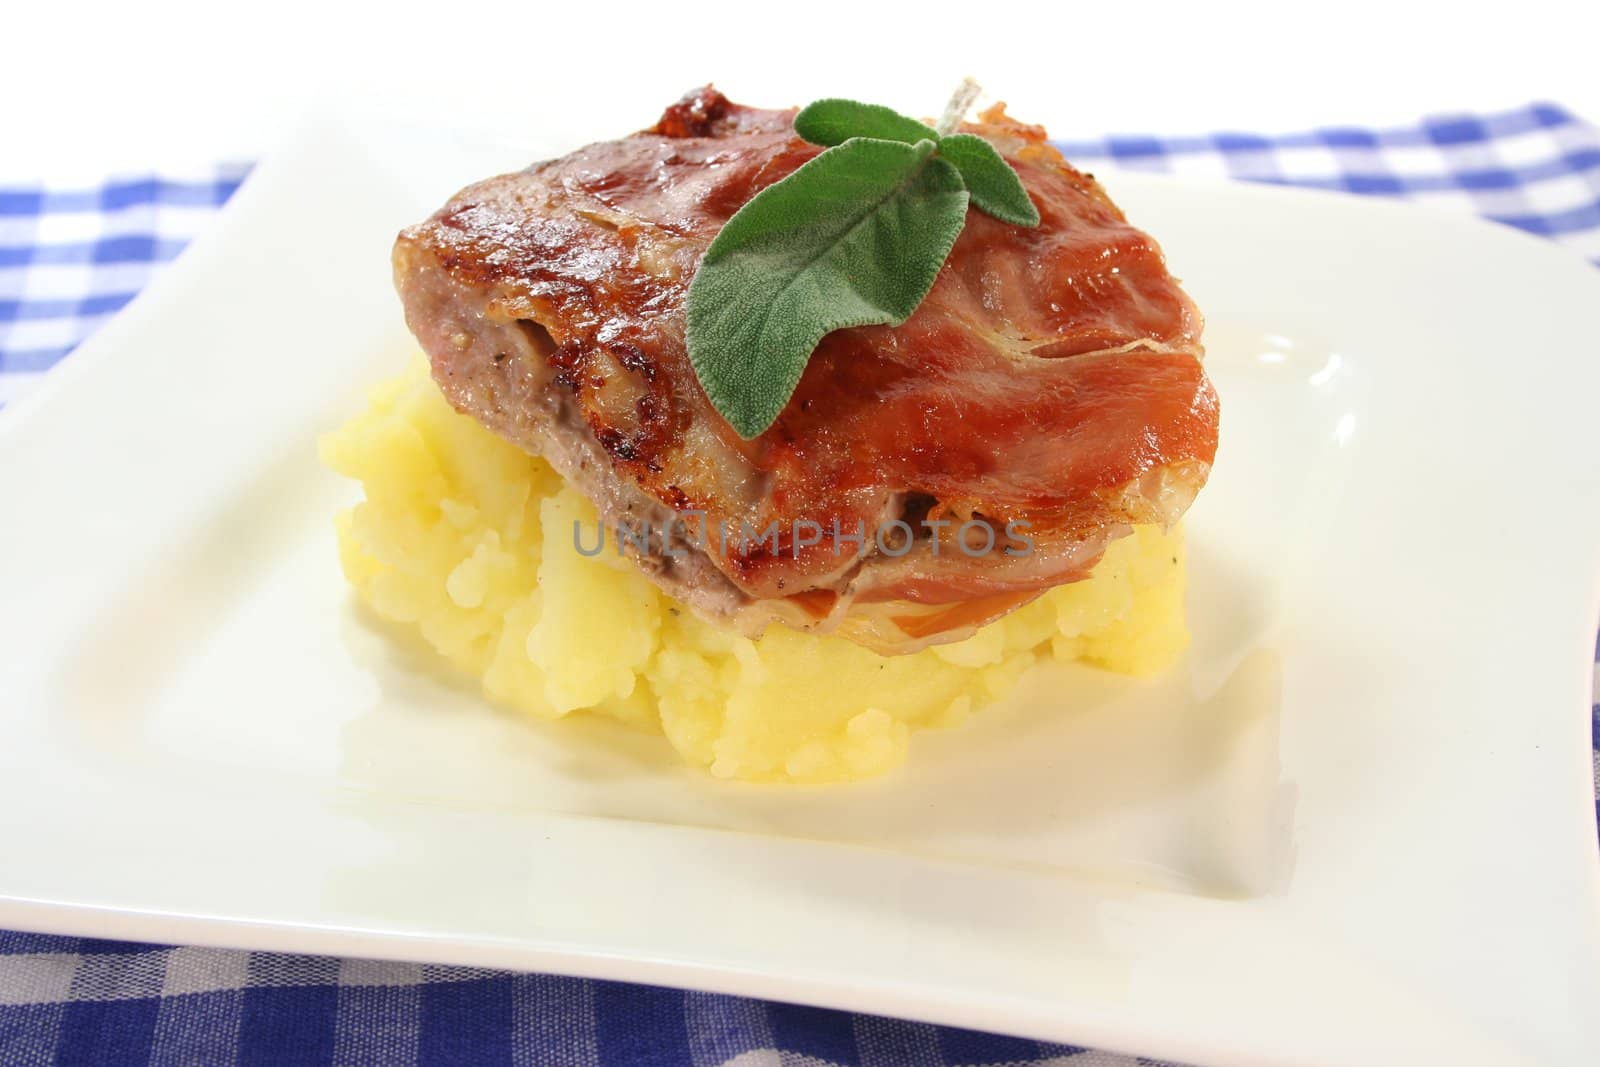 Saltimbocca of veal with bacon, sage and dried tomatoes